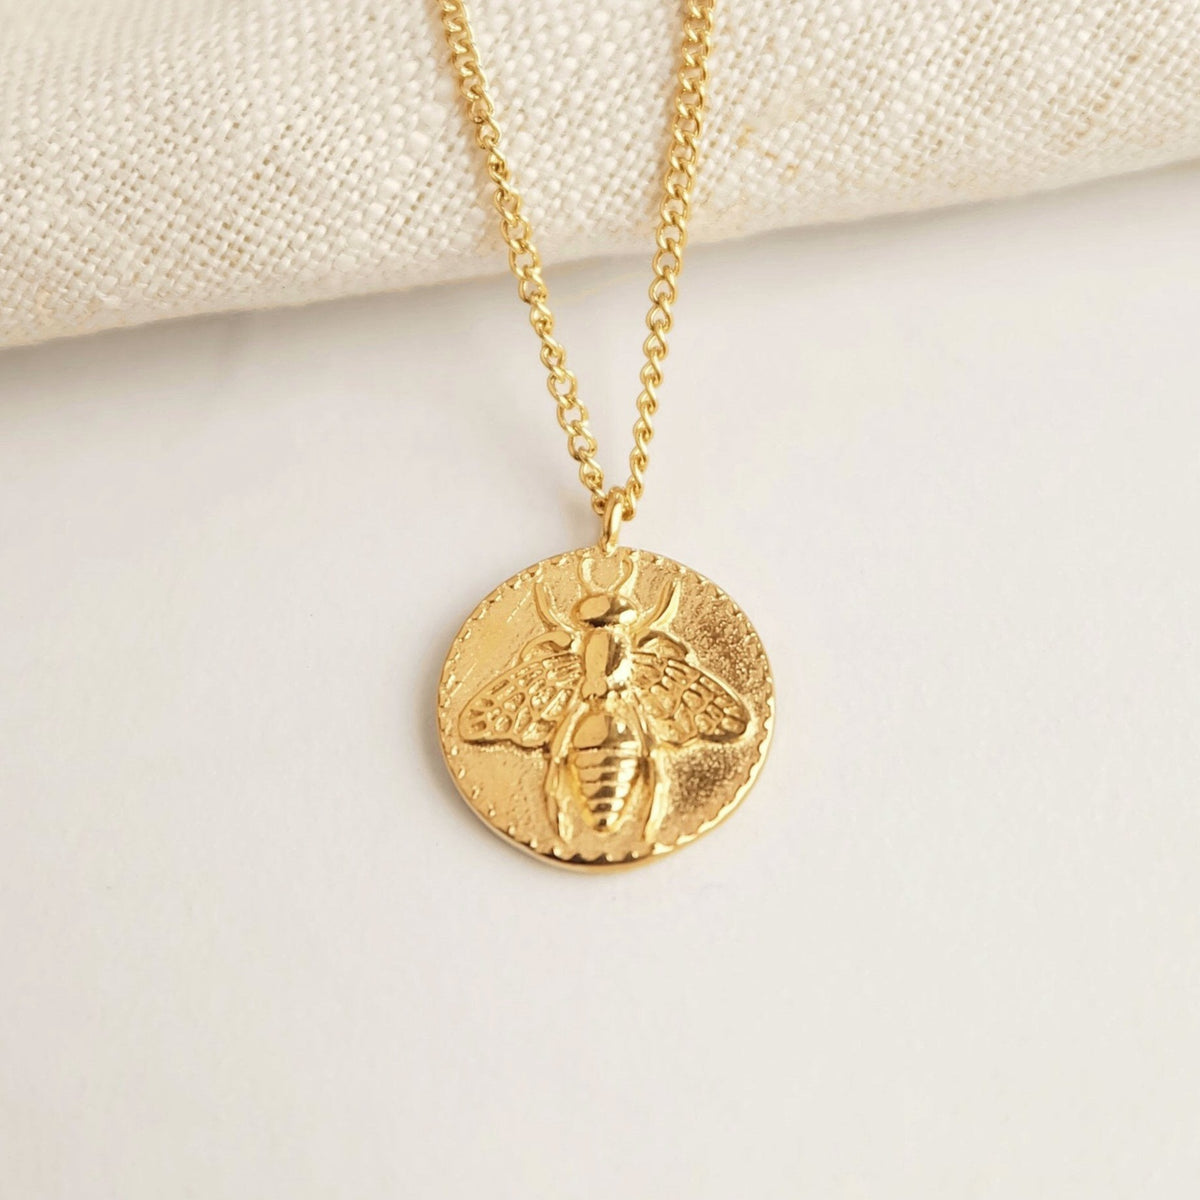 Bee Coin Necklace, gold coin necklace